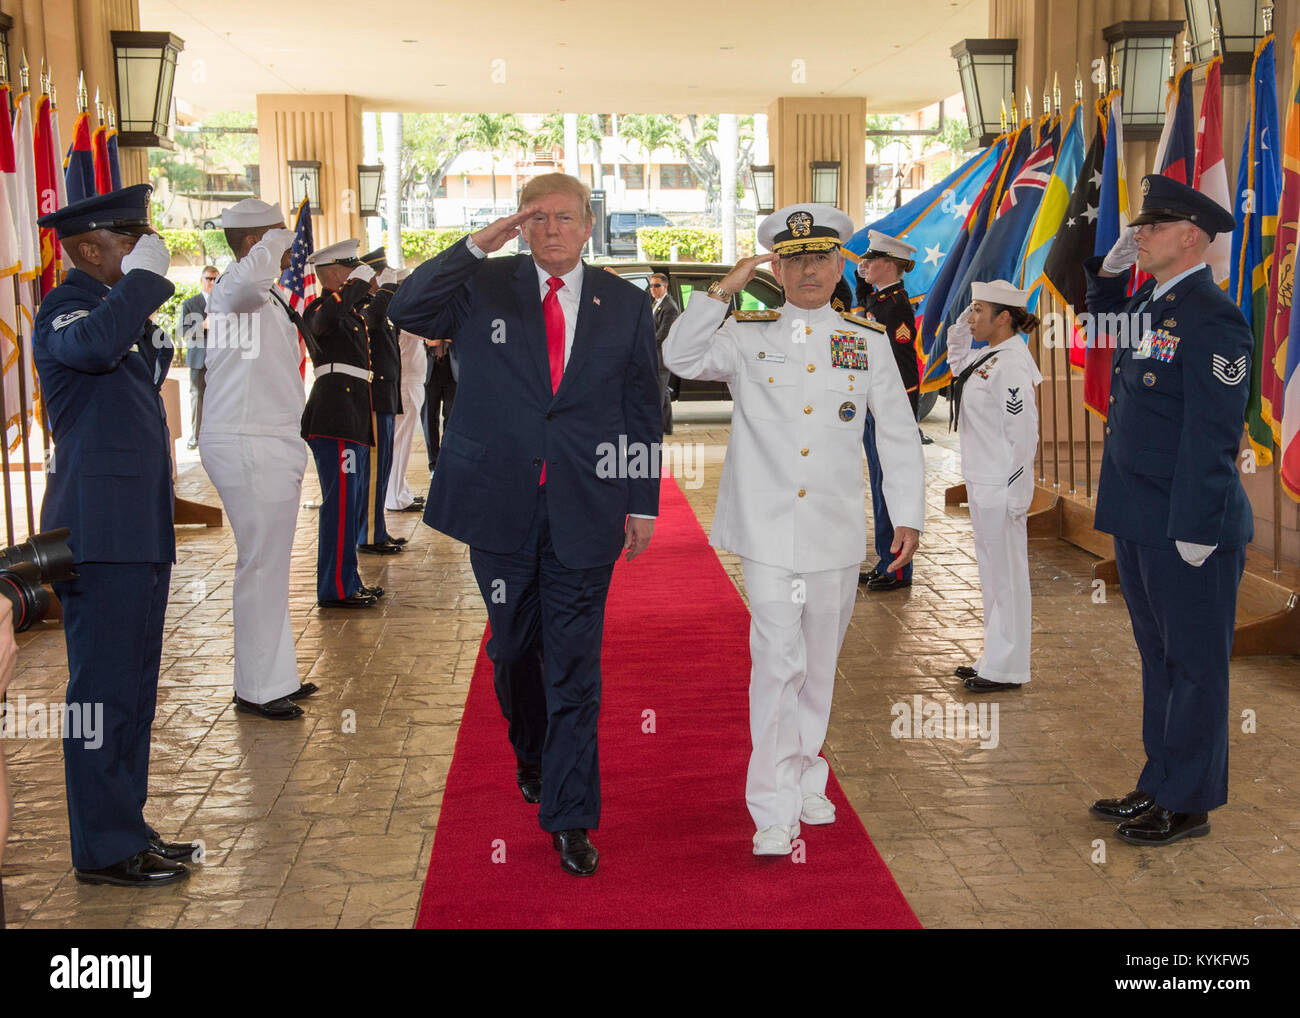 171103-N-WY954-037  CAMP H.M. SMITH, Hawaii (Nov. 3, 2017) President Donald J. Trump and U.S. Pacific Command (USPACOM) Commander, Adm. Harry Harris, are piped aboard during an honors ceremony at USPACOM headquarters.  The President is in Hawaii to receive a briefing from USPACOM prior to traveling to Japan, the Republic of Korea, China, Vietnam and the Philippines from November 3-14. During the trip the President will underscore his commitment to longstanding U.S. alliances and partnerships, and reaffirm U.S. leadership in promoting a free and open Indo-Asia-Pacific region. (U.S. Navy photo b Stock Photo